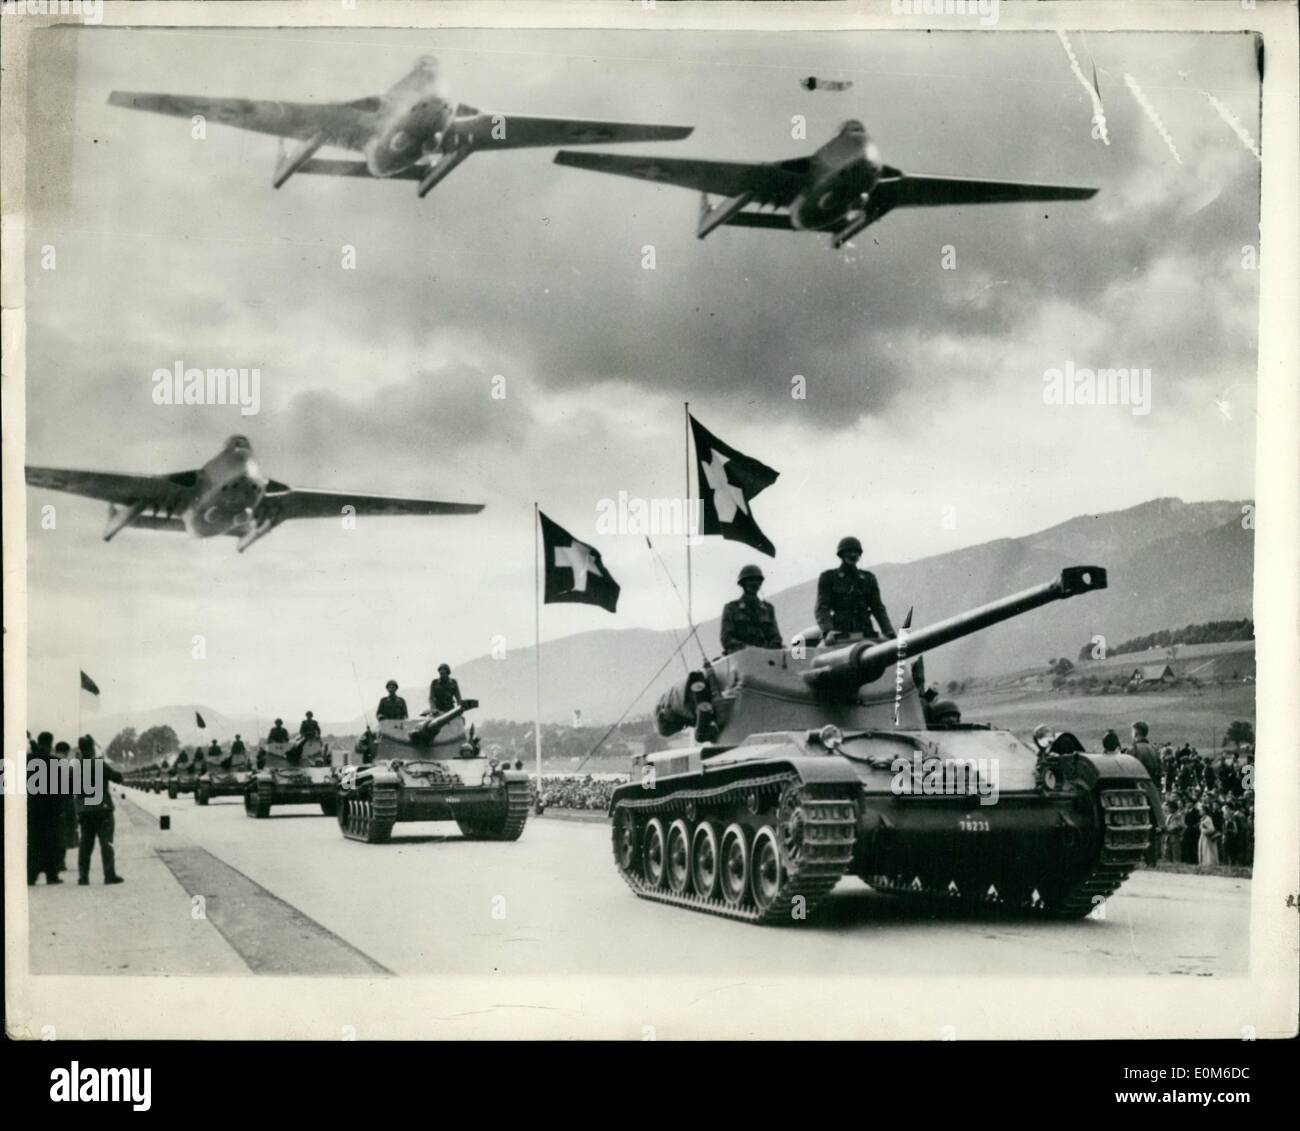 Oct. 10, 1953 - Parade Of The Swiss Army And Air Force Armoured Cars And Vampires in Review: Photo Shows The impressive scene during the big parade of the Swiss Army in the Kantonsstrasse near Scolothurn and Biesel.Tanks and armoured vehicles of the Amx type can be seen while flying overhead are Vampire aircraft which are now being produced in licence in Switzerland. Stock Photo